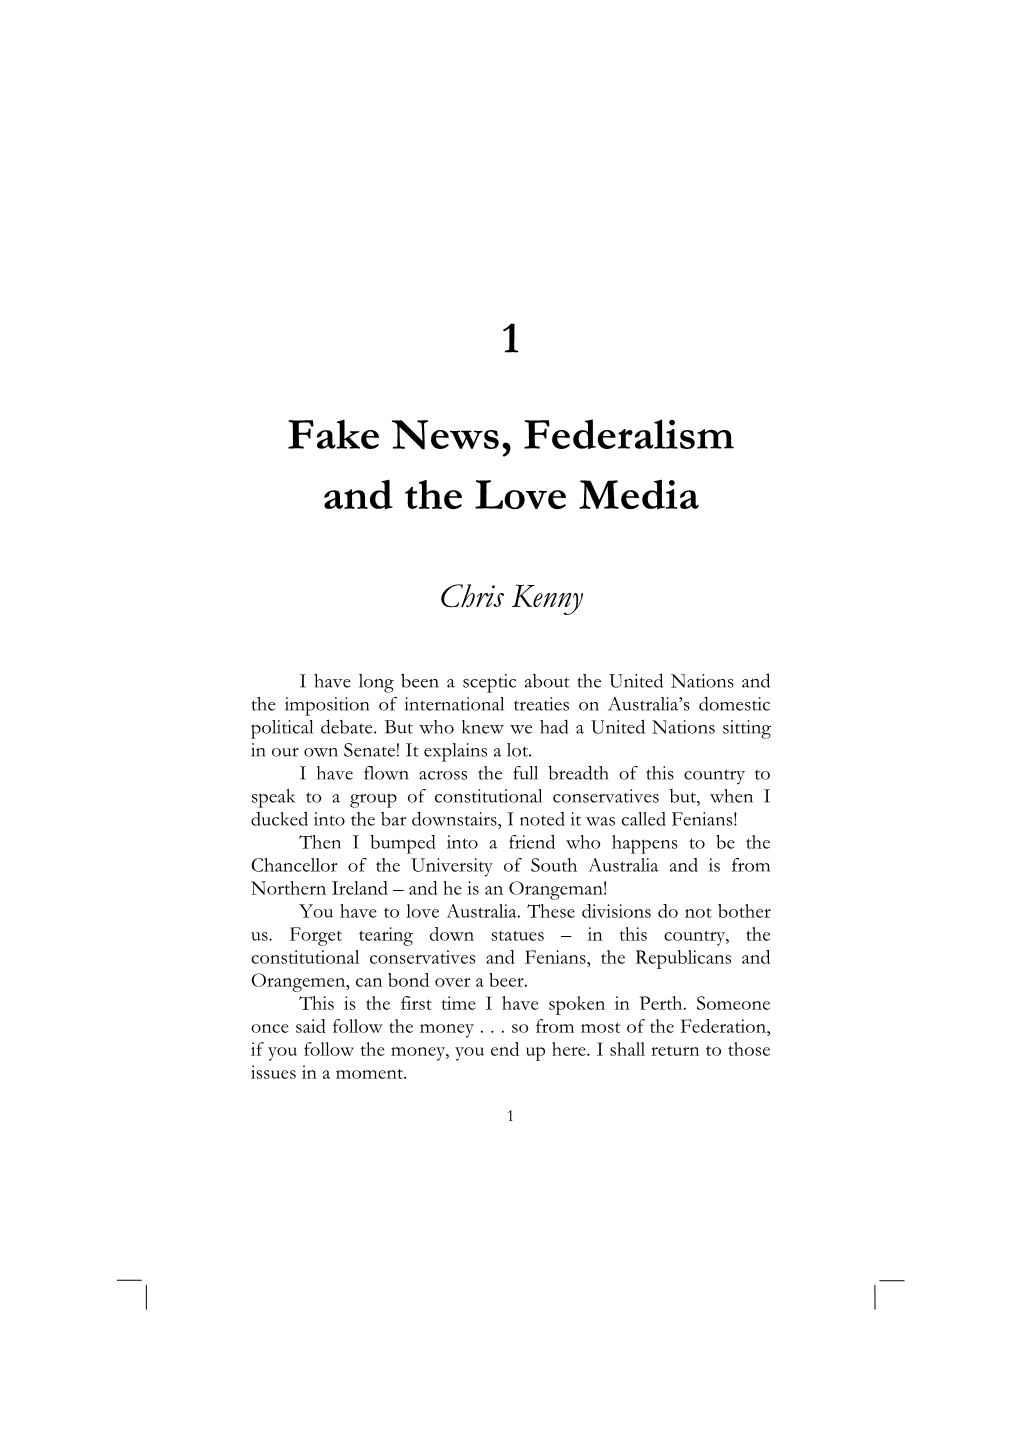 1 Fake News, Federalism and the Love Media